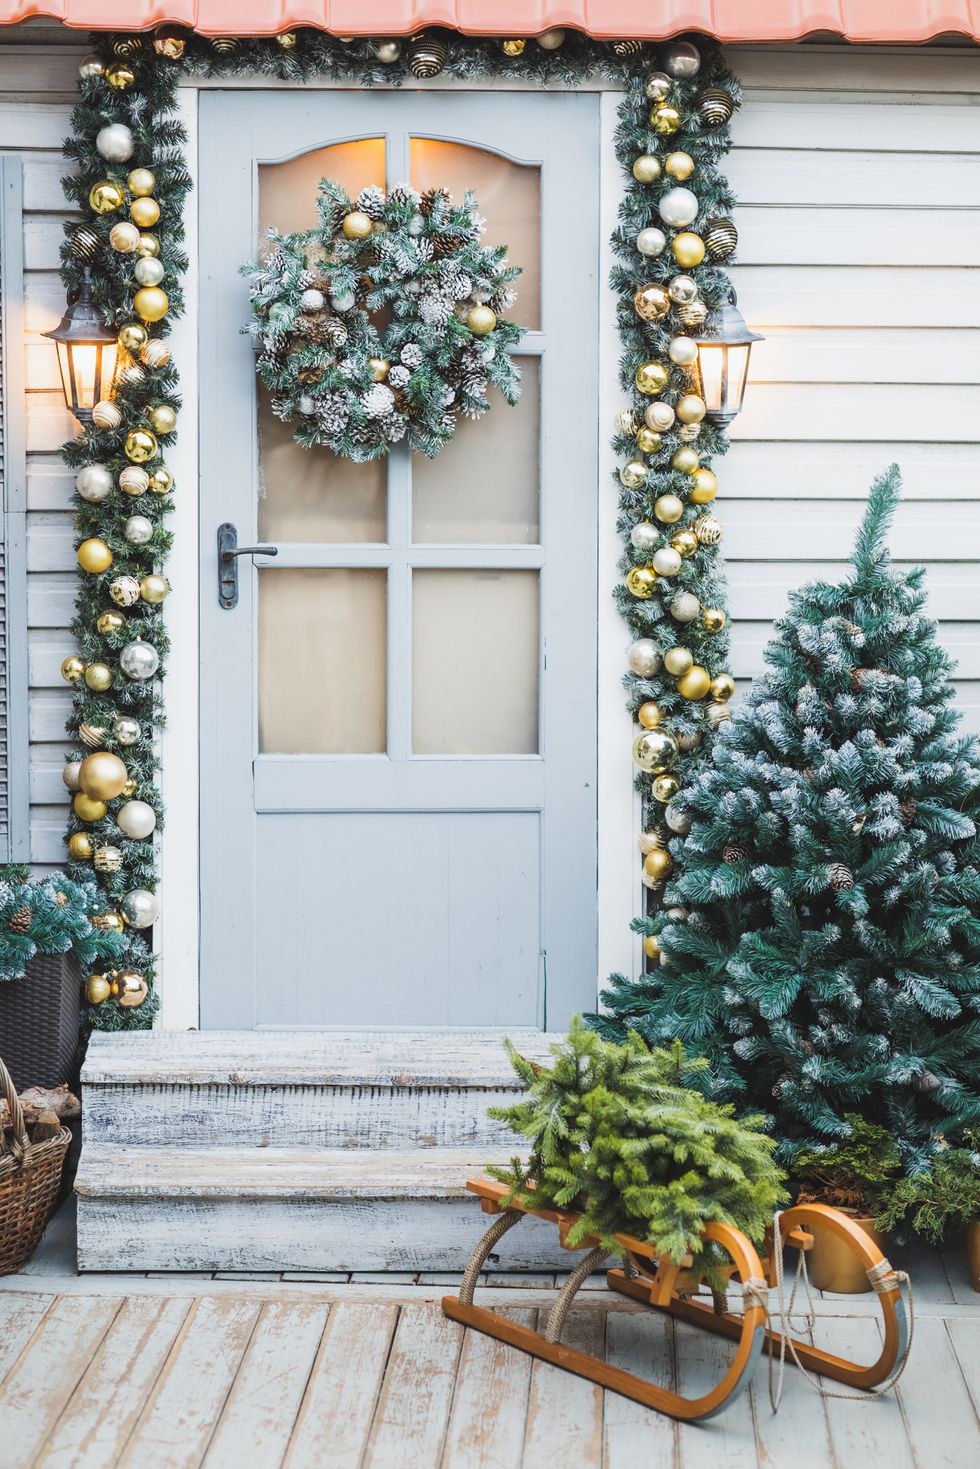 home decorated for christmas holidays with wreath trees, ornaments and garlands